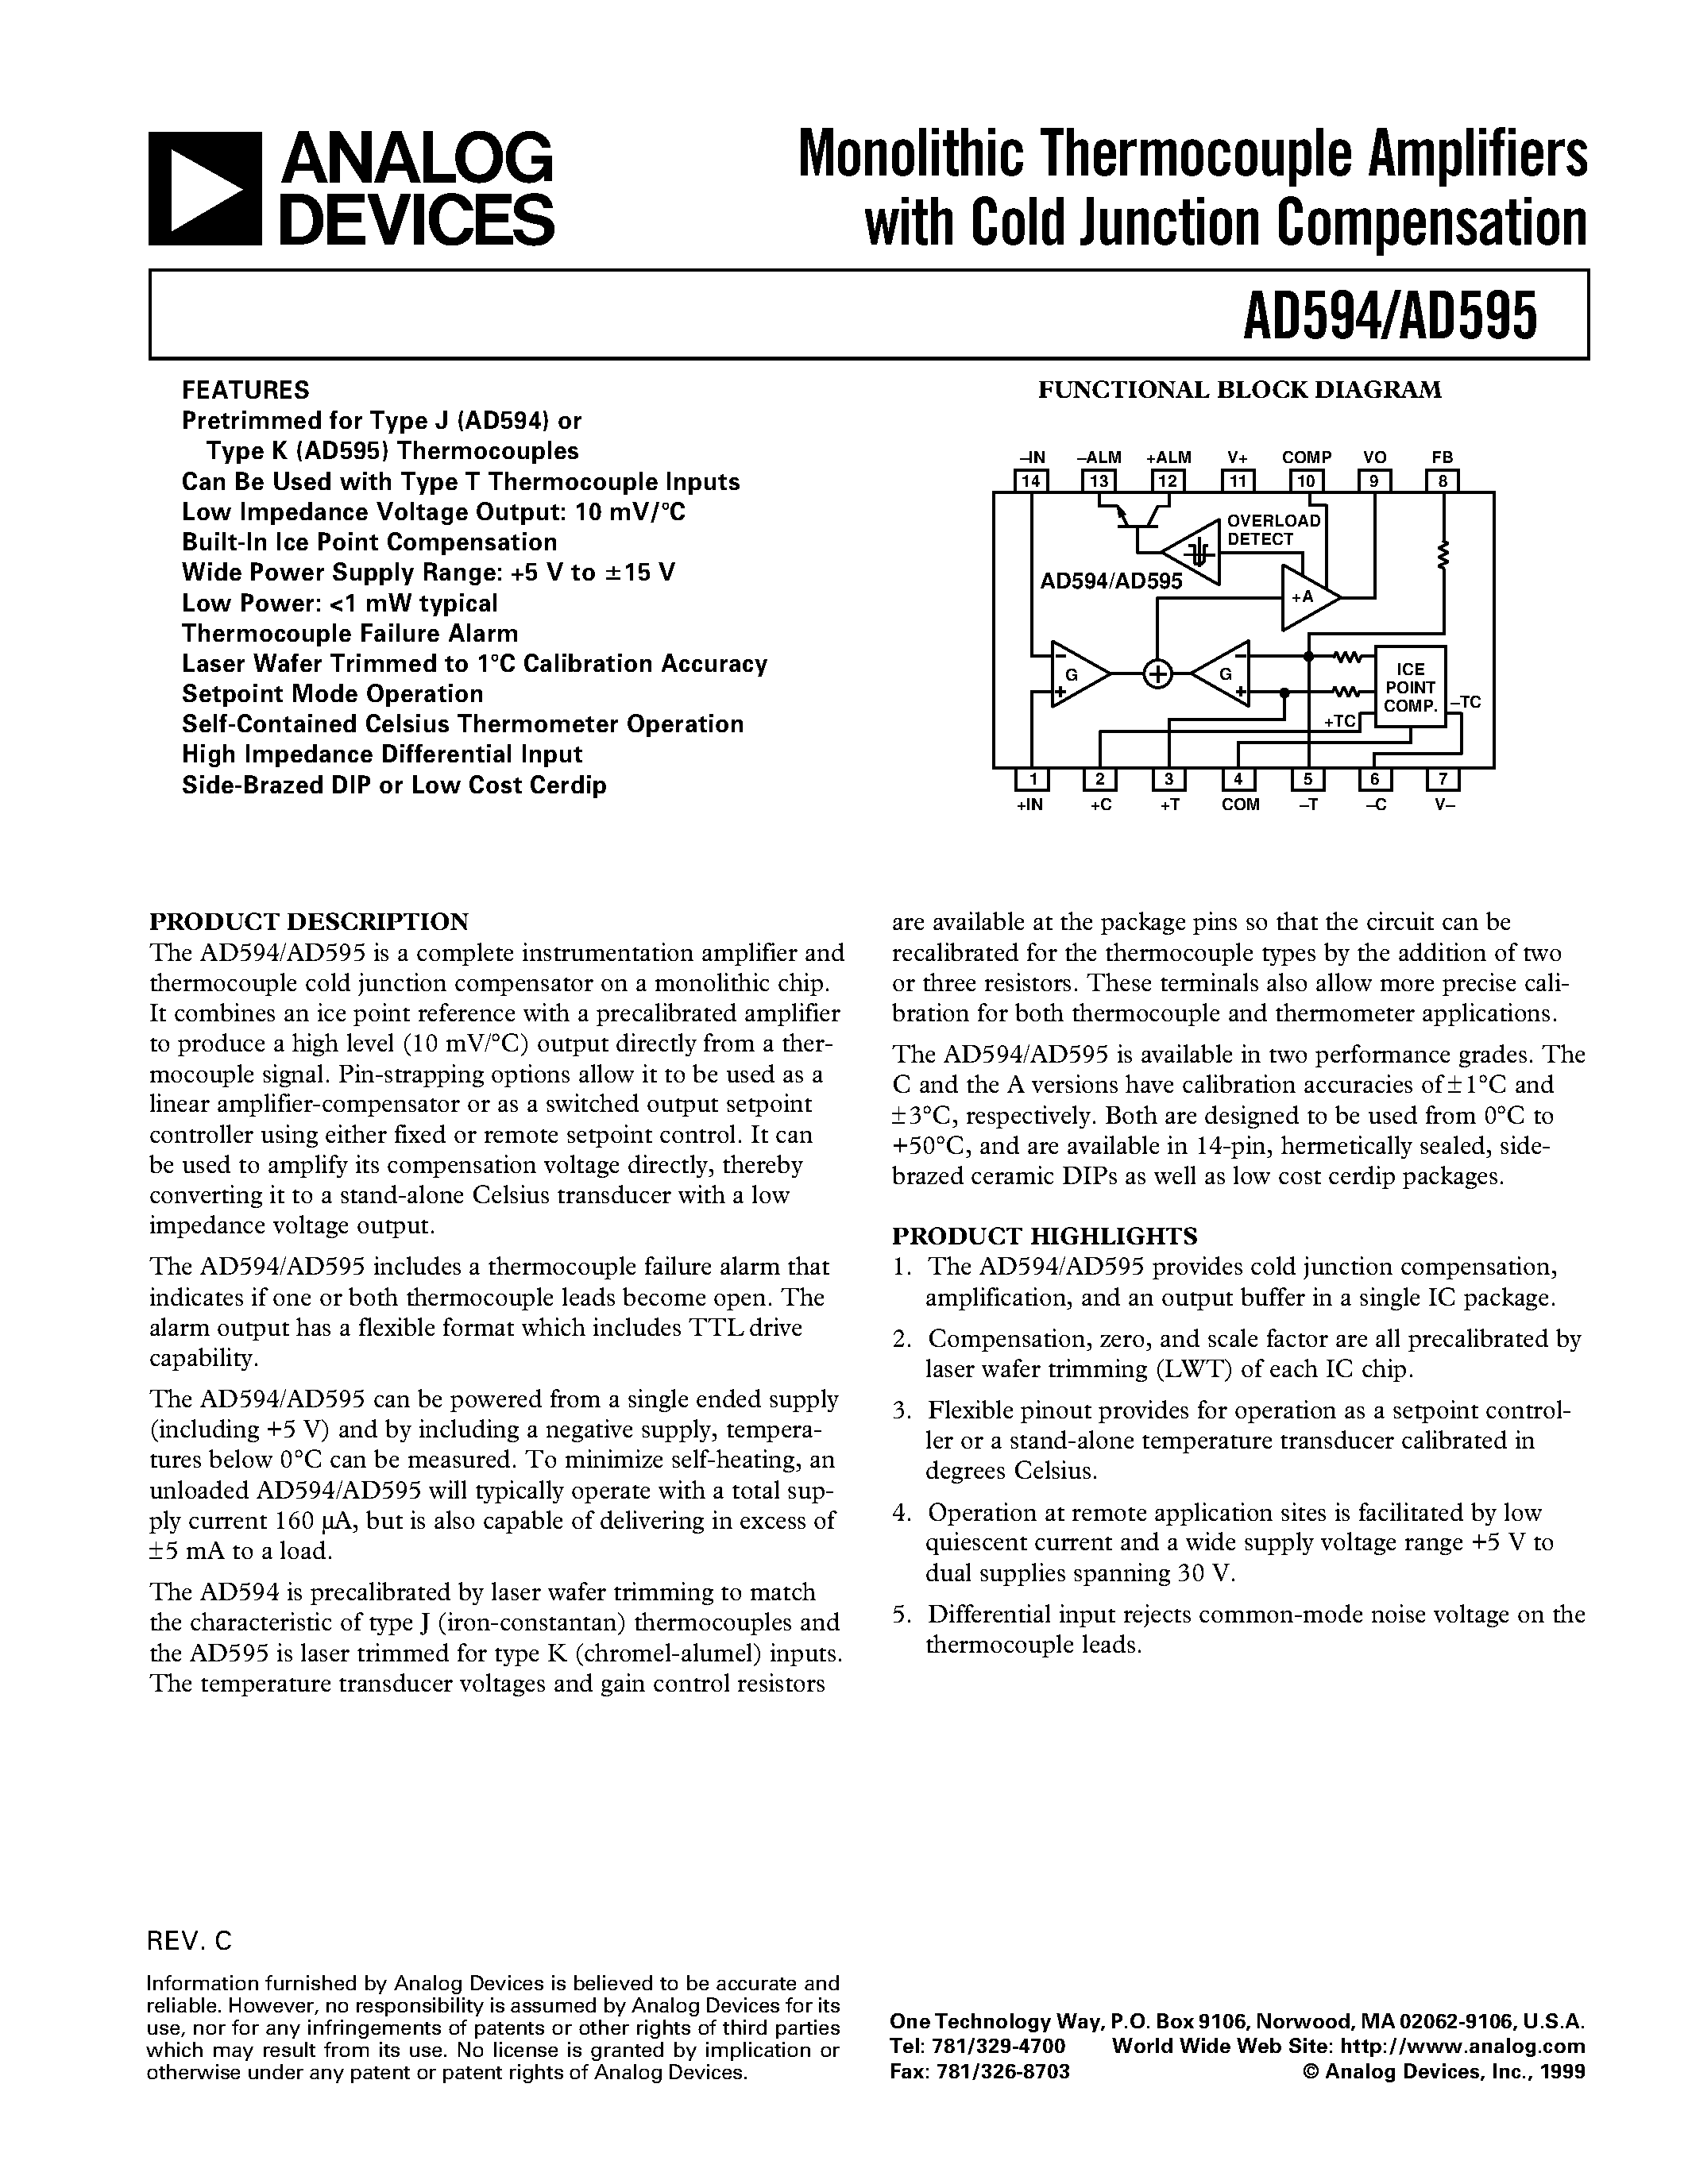 Datasheet AD595C - Monolithic Thermocouple Amplifiers with Cold Junction Compensation page 1